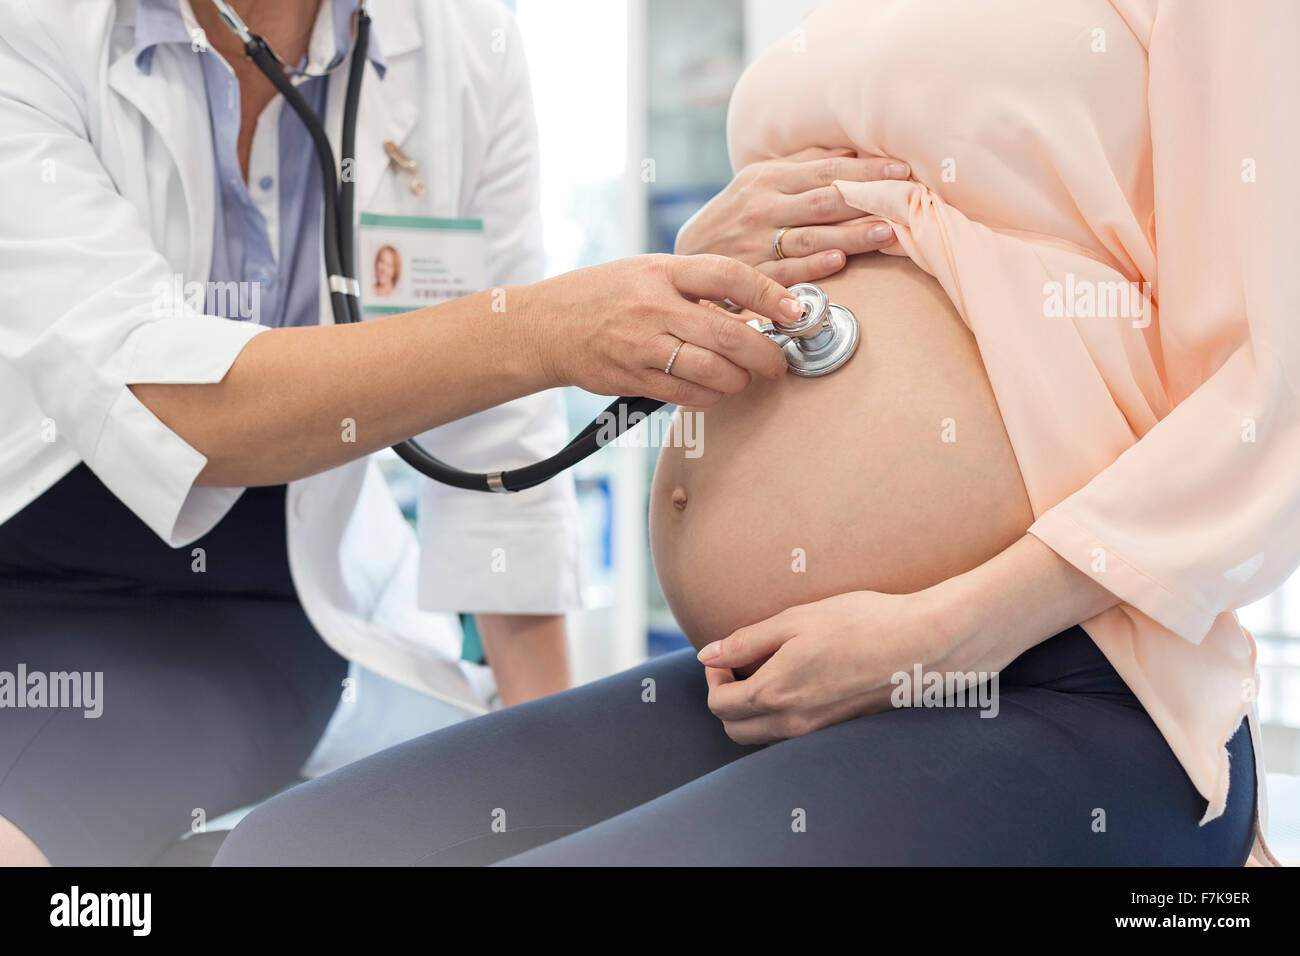 Doctor using stethoscope on pregnant patient’s stomach Stock Photo